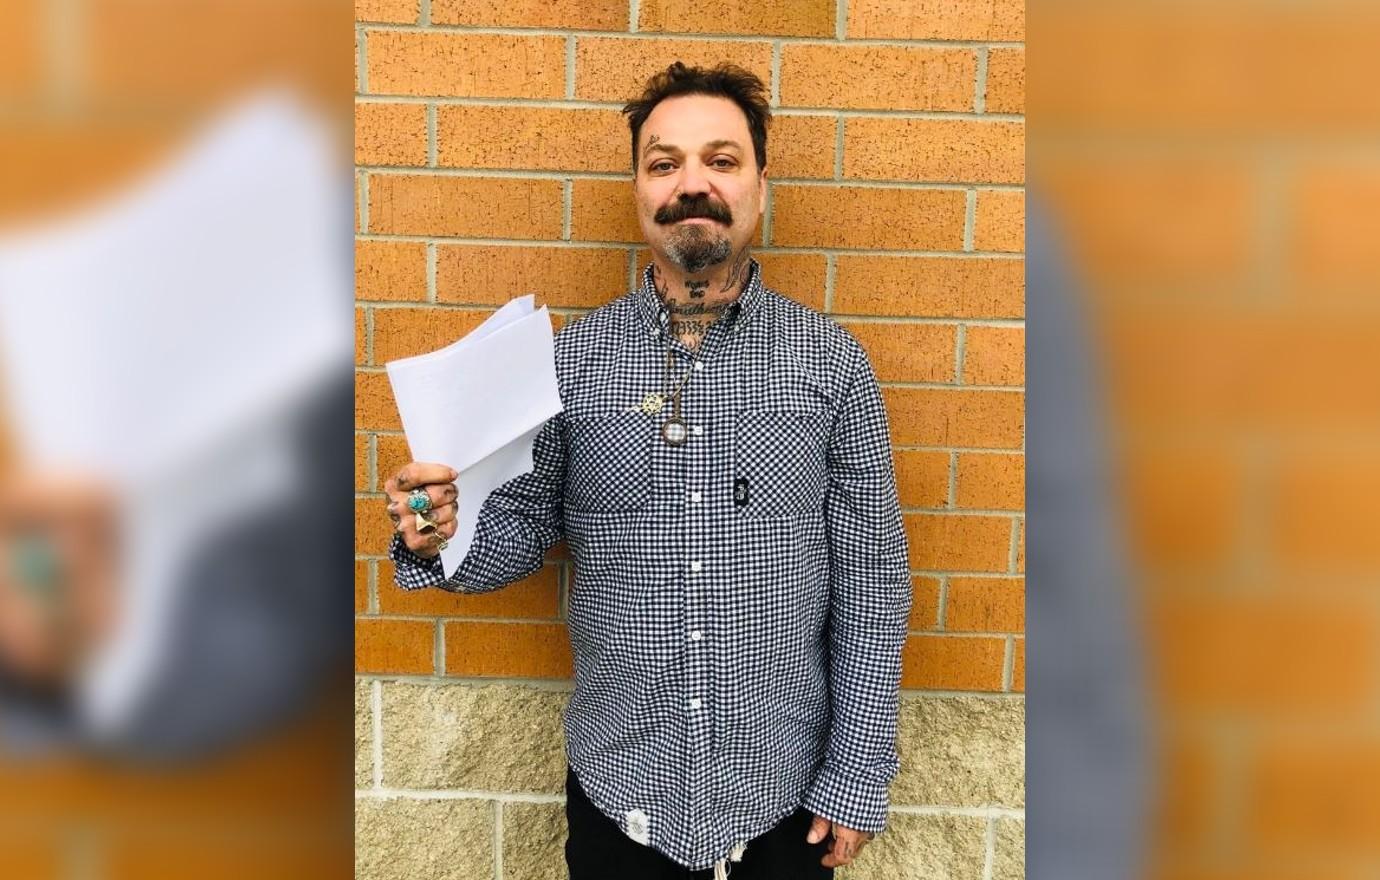 Bam Margera Slams Brother For Accusations About Alleged Meth Addiction image